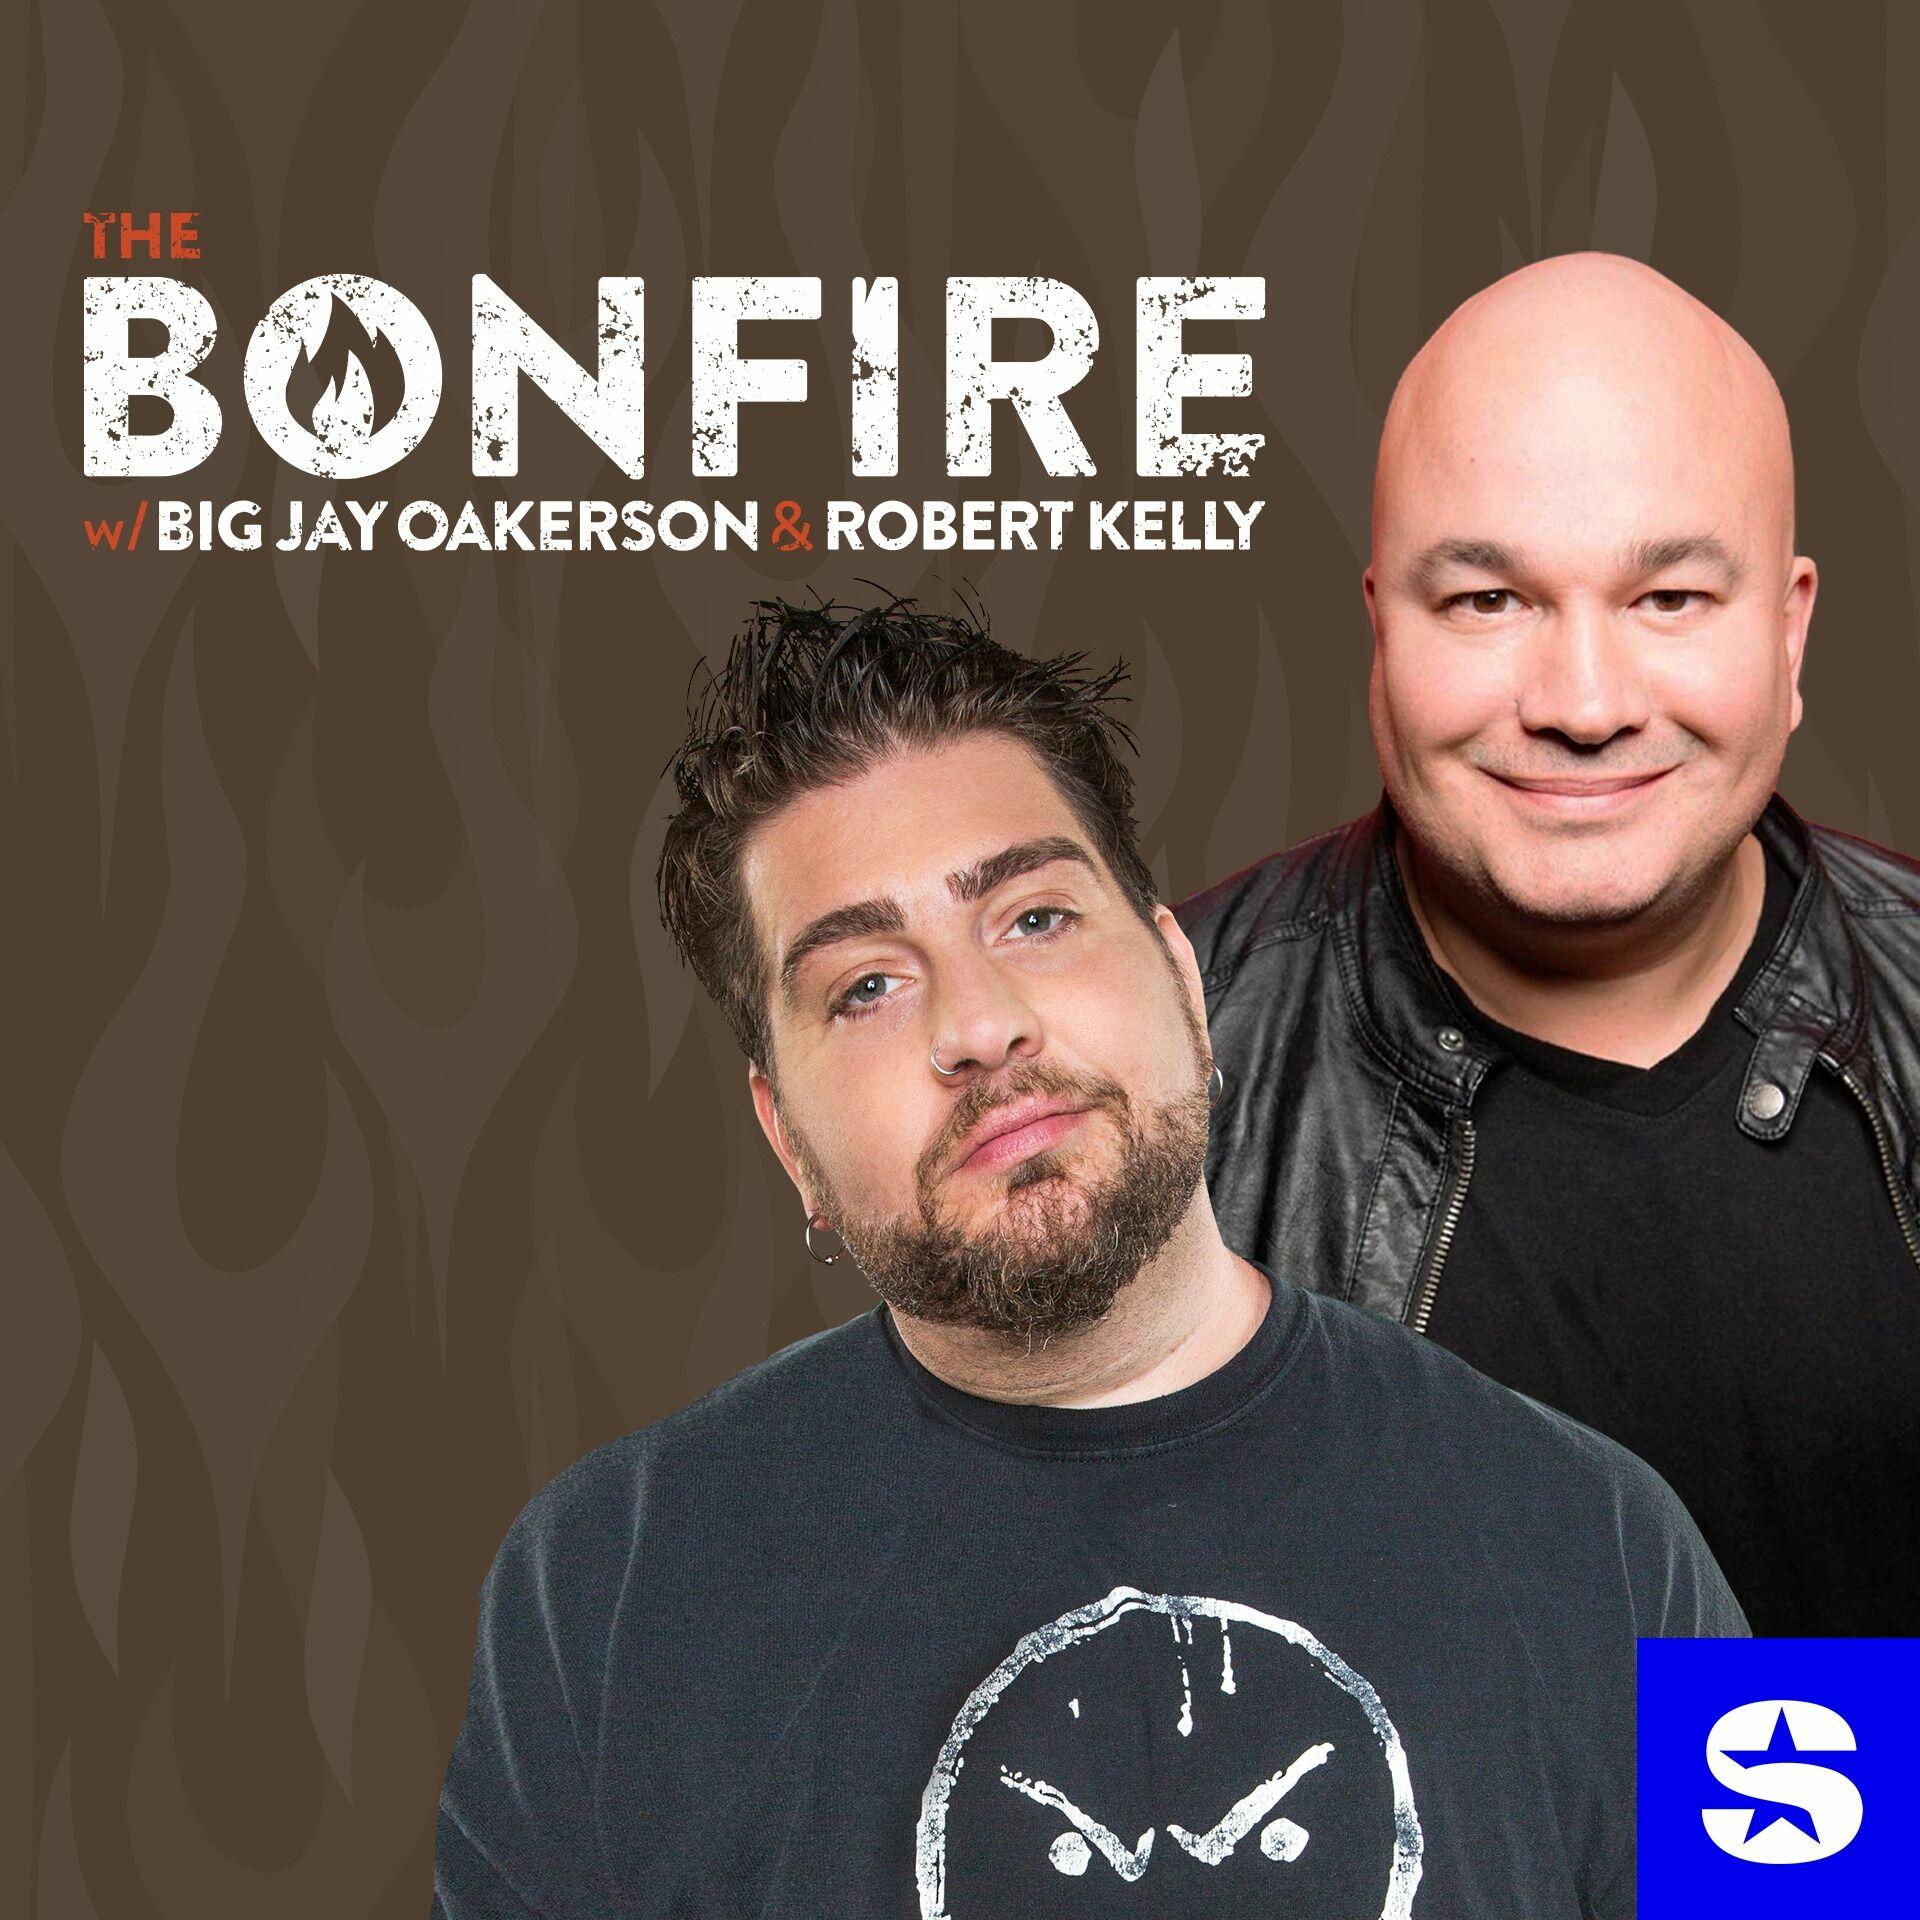 ♫ The Bonfire with Big Jay Oakerson and Robert Kelly  Big Jay Oakerson and  Robert Kelly invite listeners and friends to come and hang out by The  Bonfire as the blunt and candid duo talk about everything from comedy and  entertainment to sports; sharing